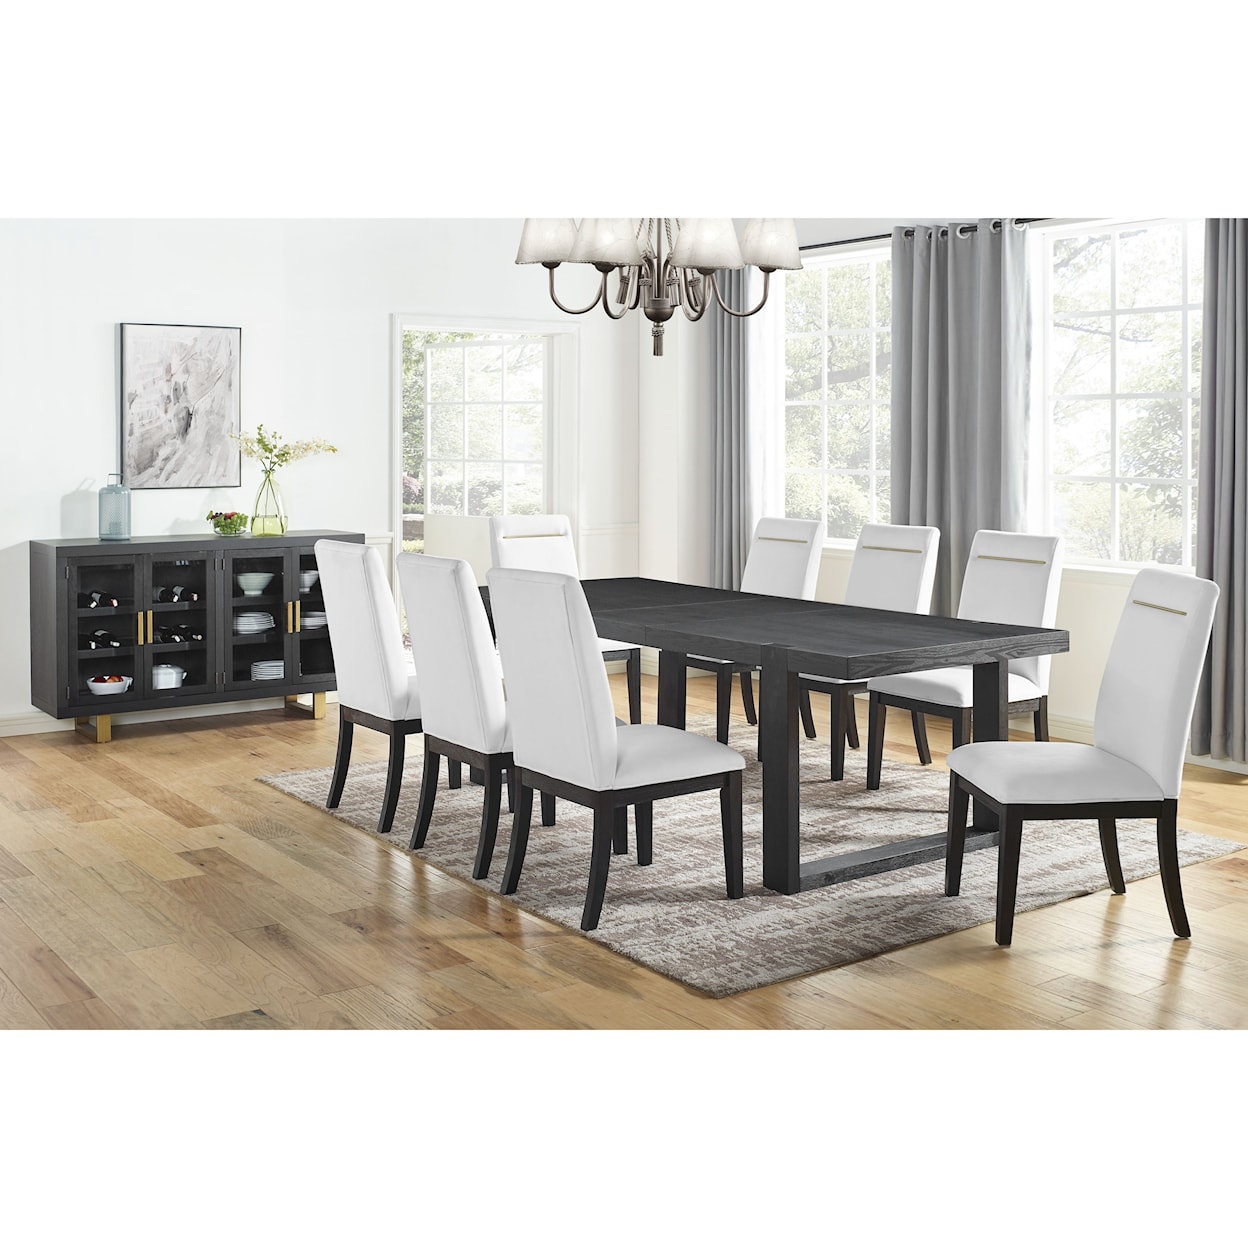 Prime Yves Dining Room Group